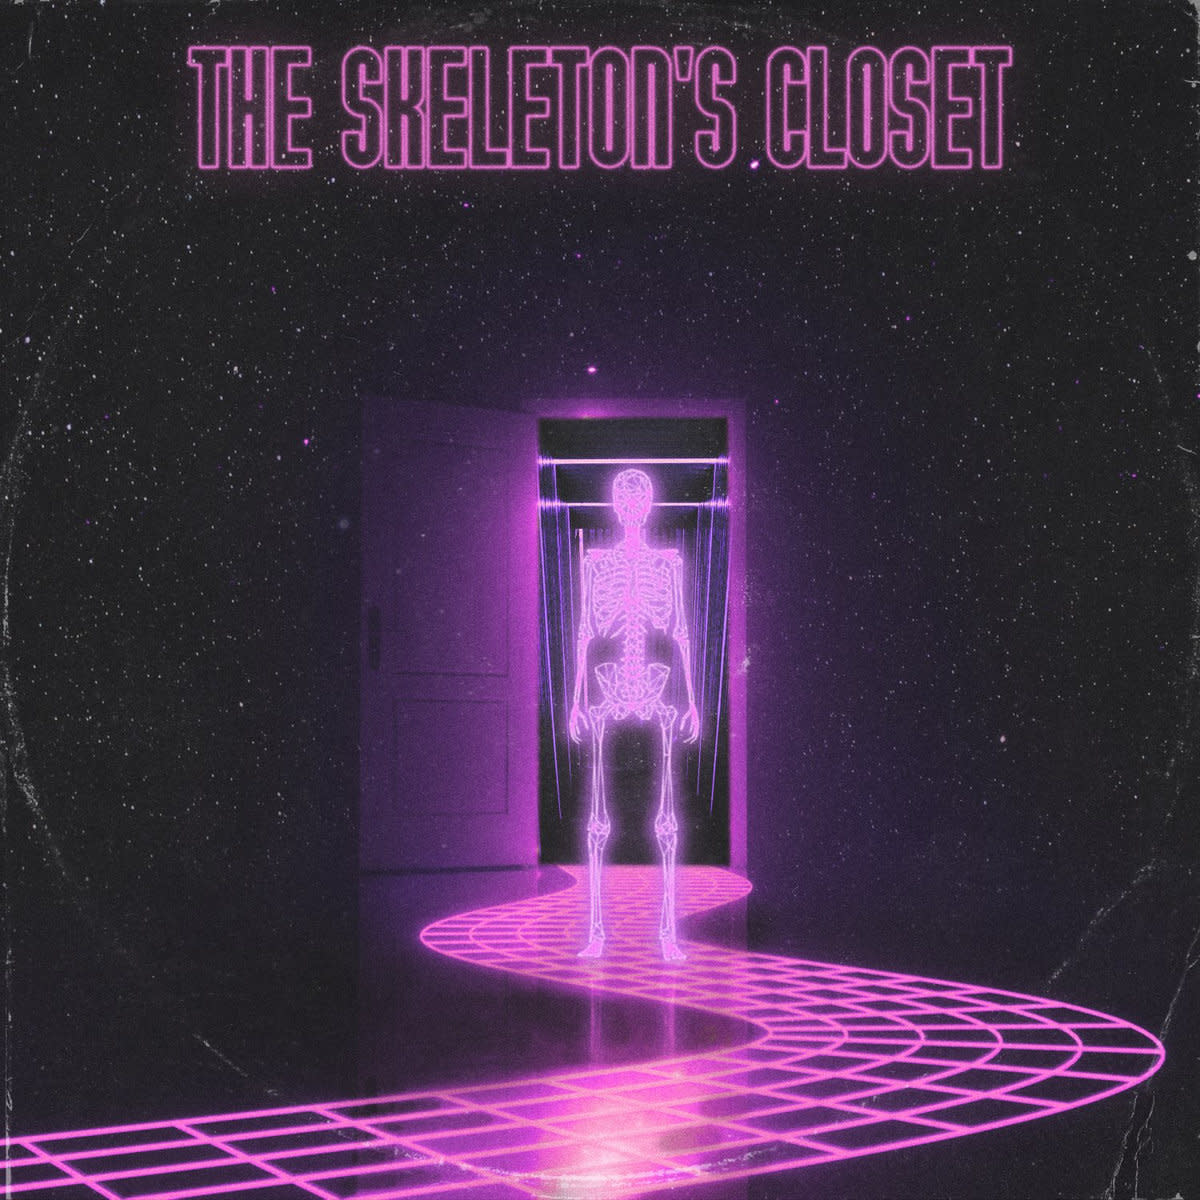 synth-album-review-the-skeletons-closet-by-color-theory